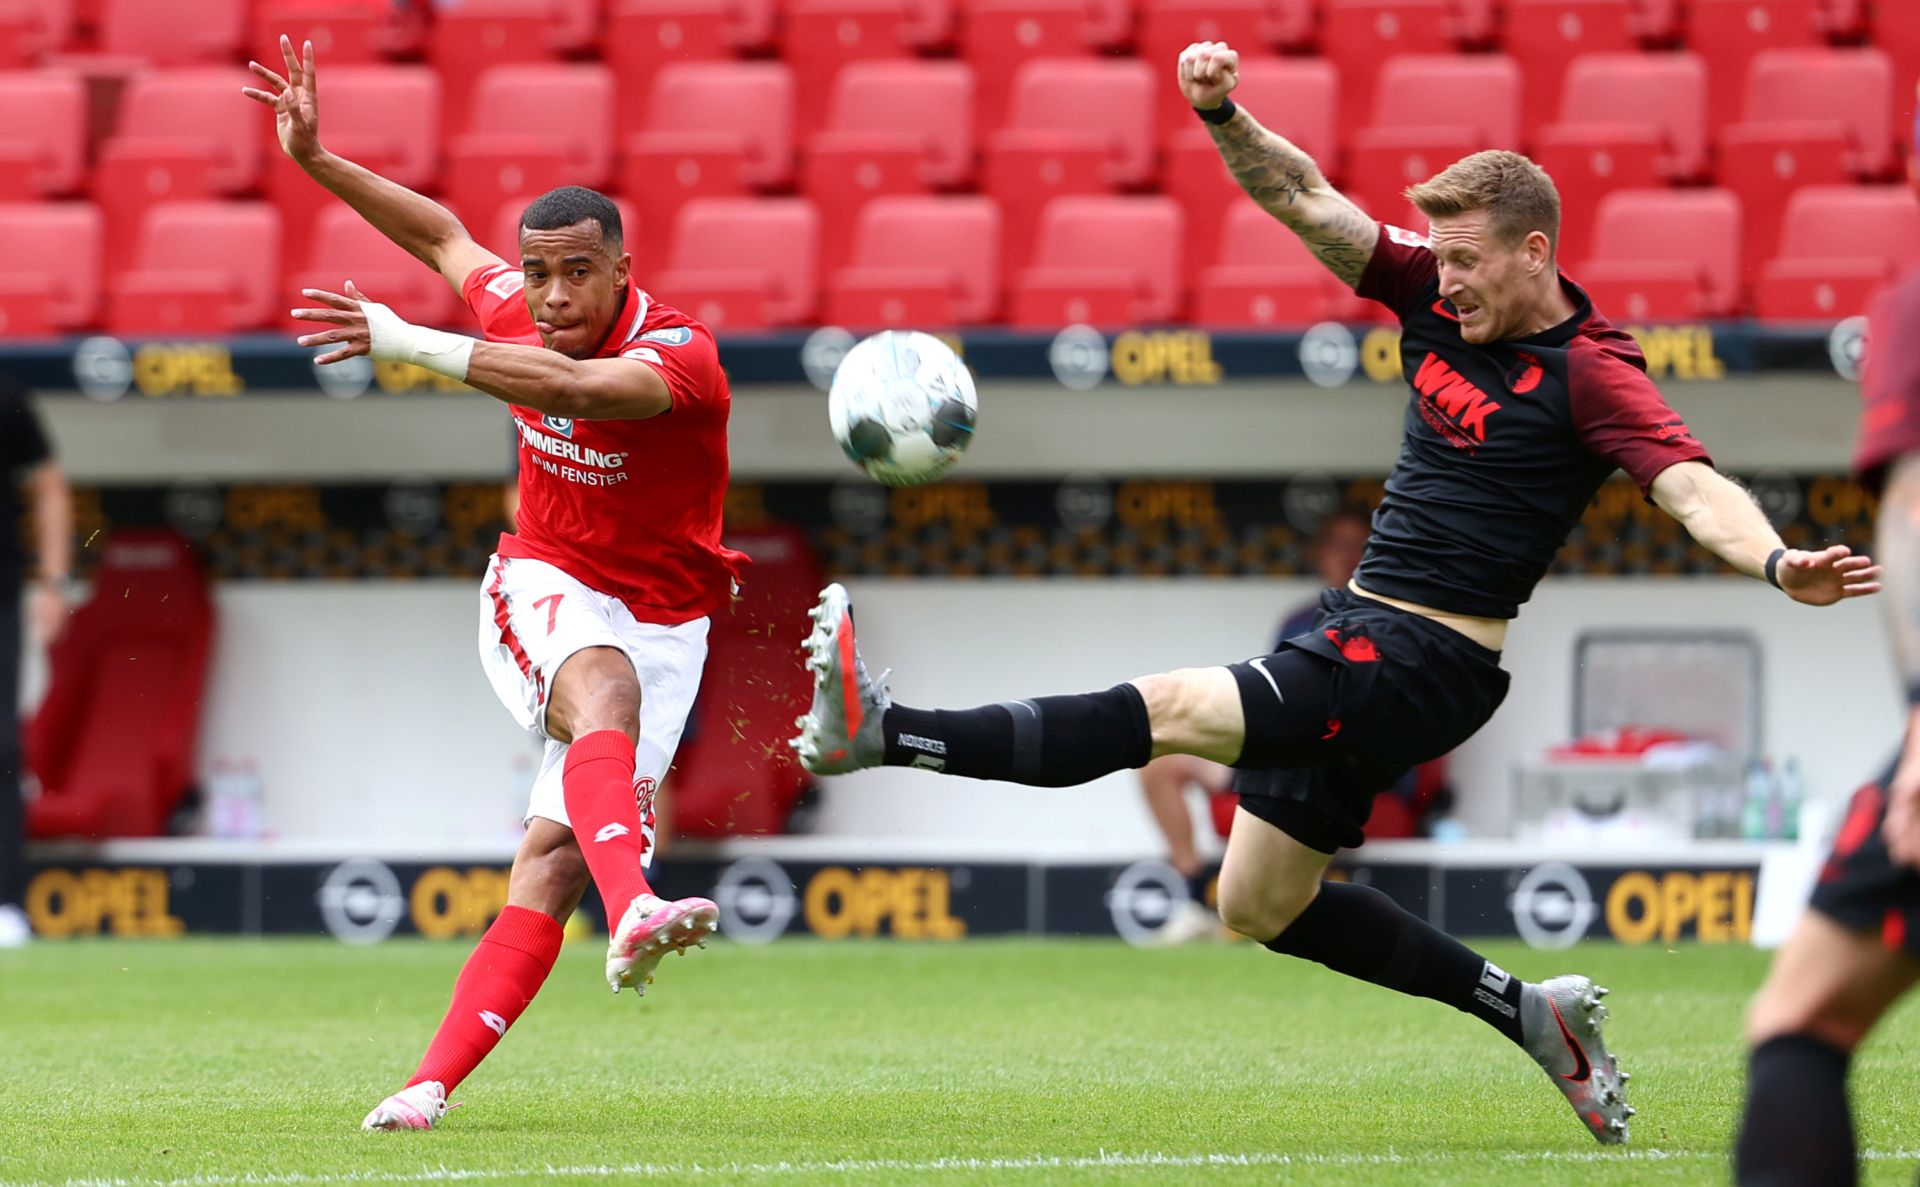 14 June 2020, Rhineland-Palatinate, Mainz: Mainz's Robin Quaison shoots on goal during the German Bundesliga soccer match between FSV Mainz 05 and FC Augsburg at the Opel Arena. Photo: Kai Pfaffenbach/reuters/Pool/dpa - IMPORTANT NOTICE: DFL and DFB regulations prohibit any use of photographs as image sequences and/or quasi-video.